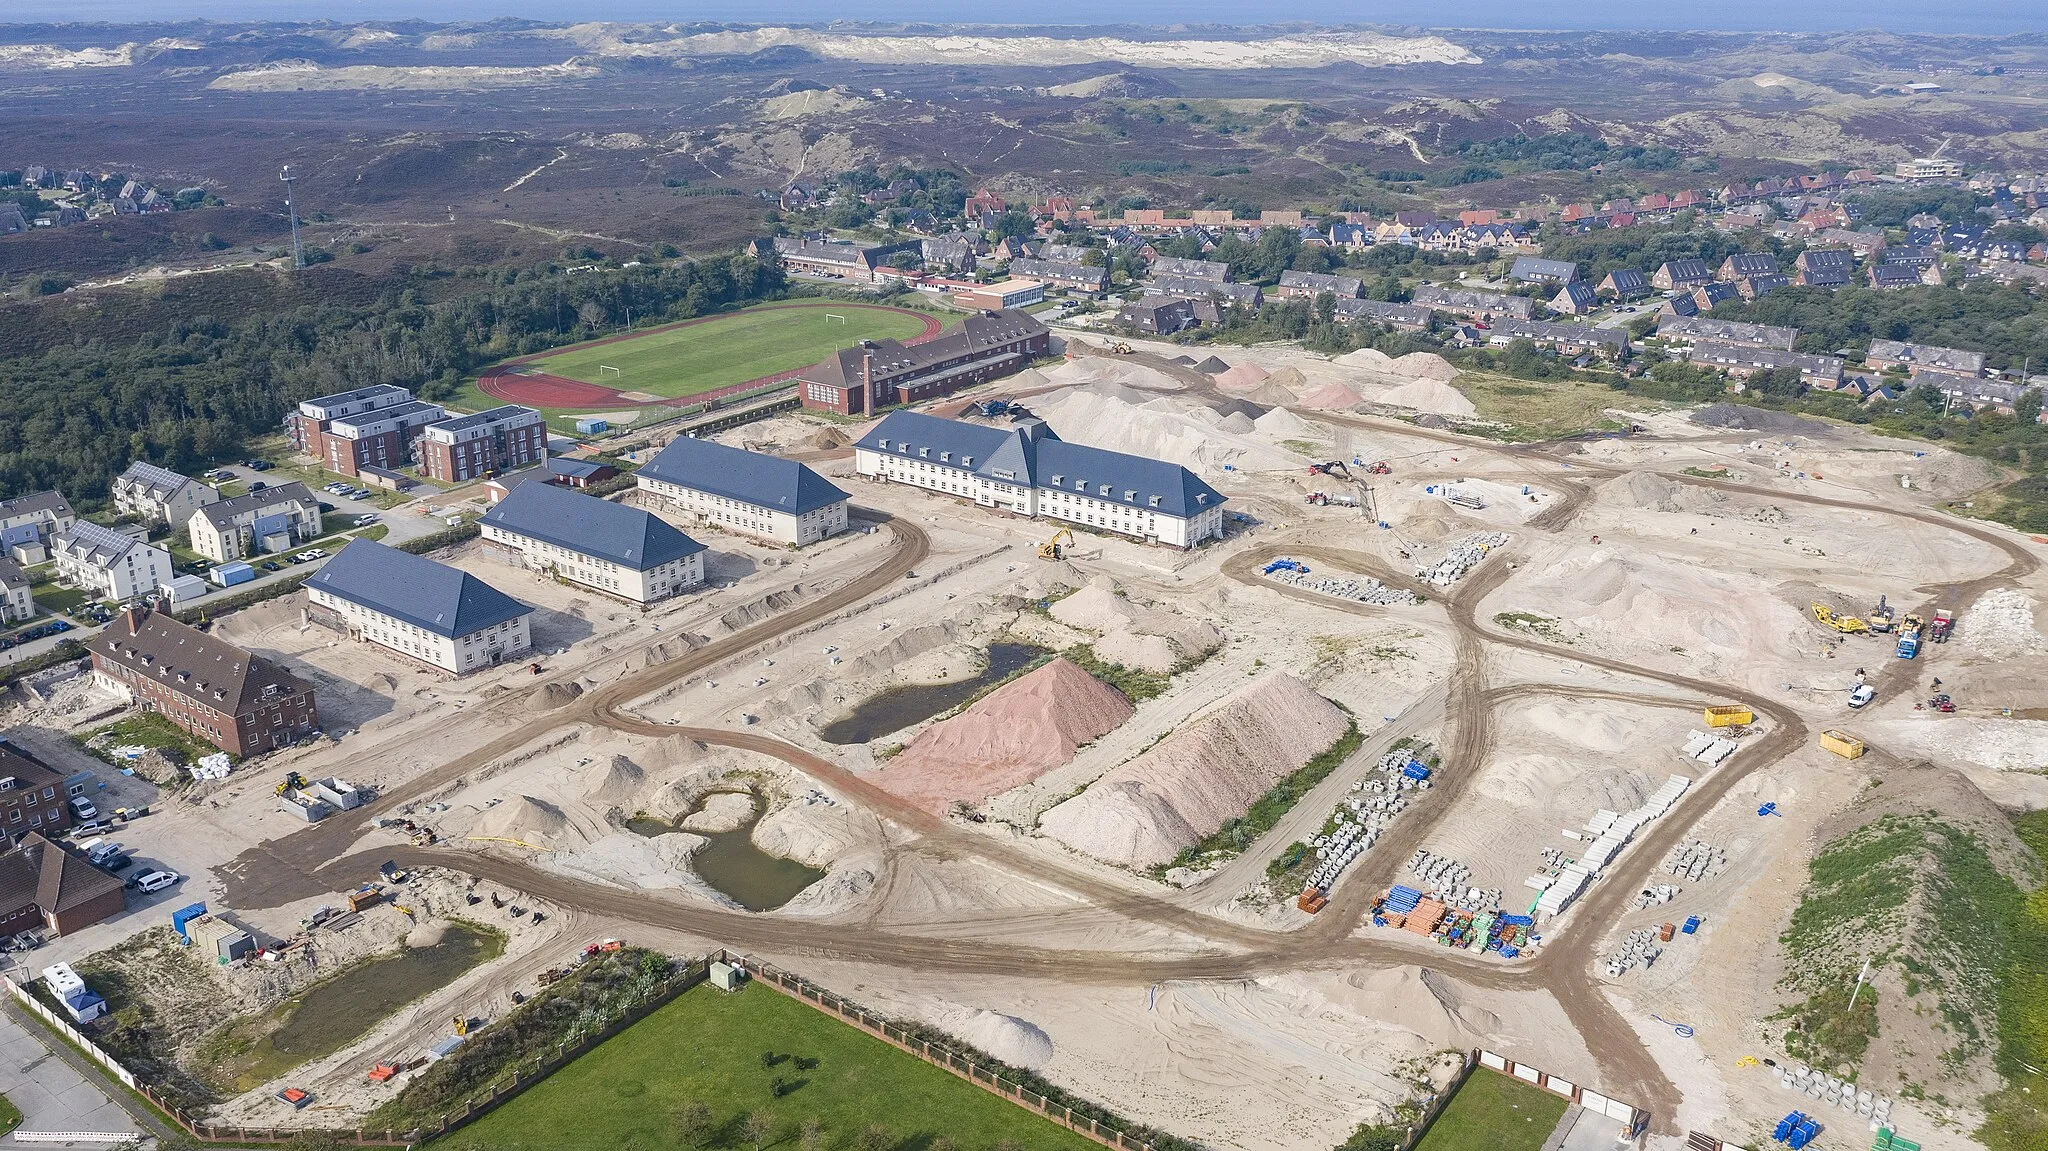 Photo showing: Aerial view of List, Sylt, Schleswig-Holstein, Germany. The area where some heavy construction work can be observed is the former site of the German navy's Supply School (MVS), that was seated here from 1956 until 2006. While some of the buildings still appear to be in their original state, those to the west have already undergone conversion. The buildings on the northern end of the former military site have apparently been demolished.